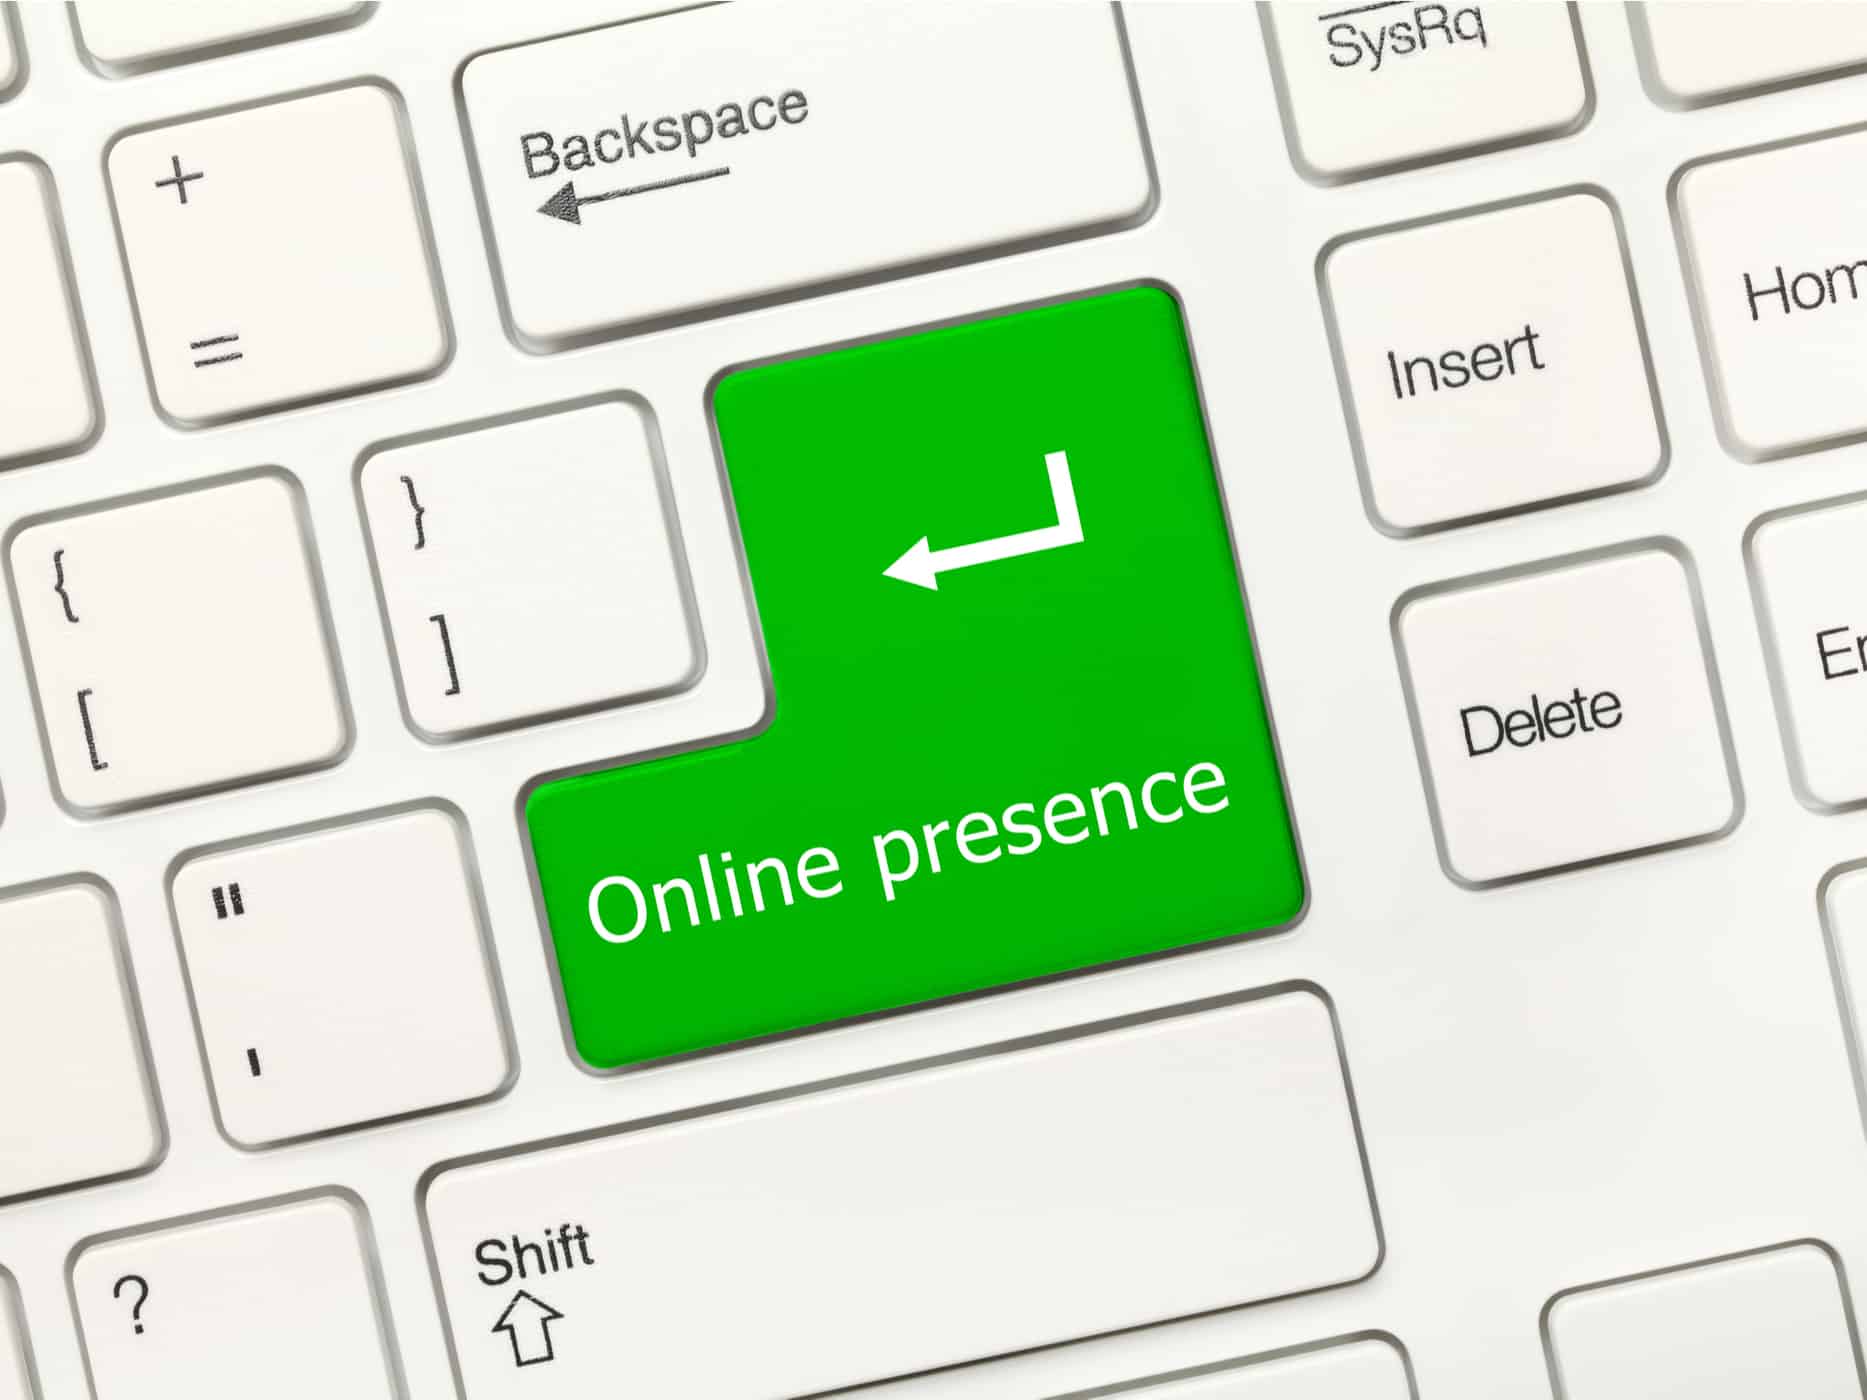 Build an online presence for your dental practice that’s out of “site”